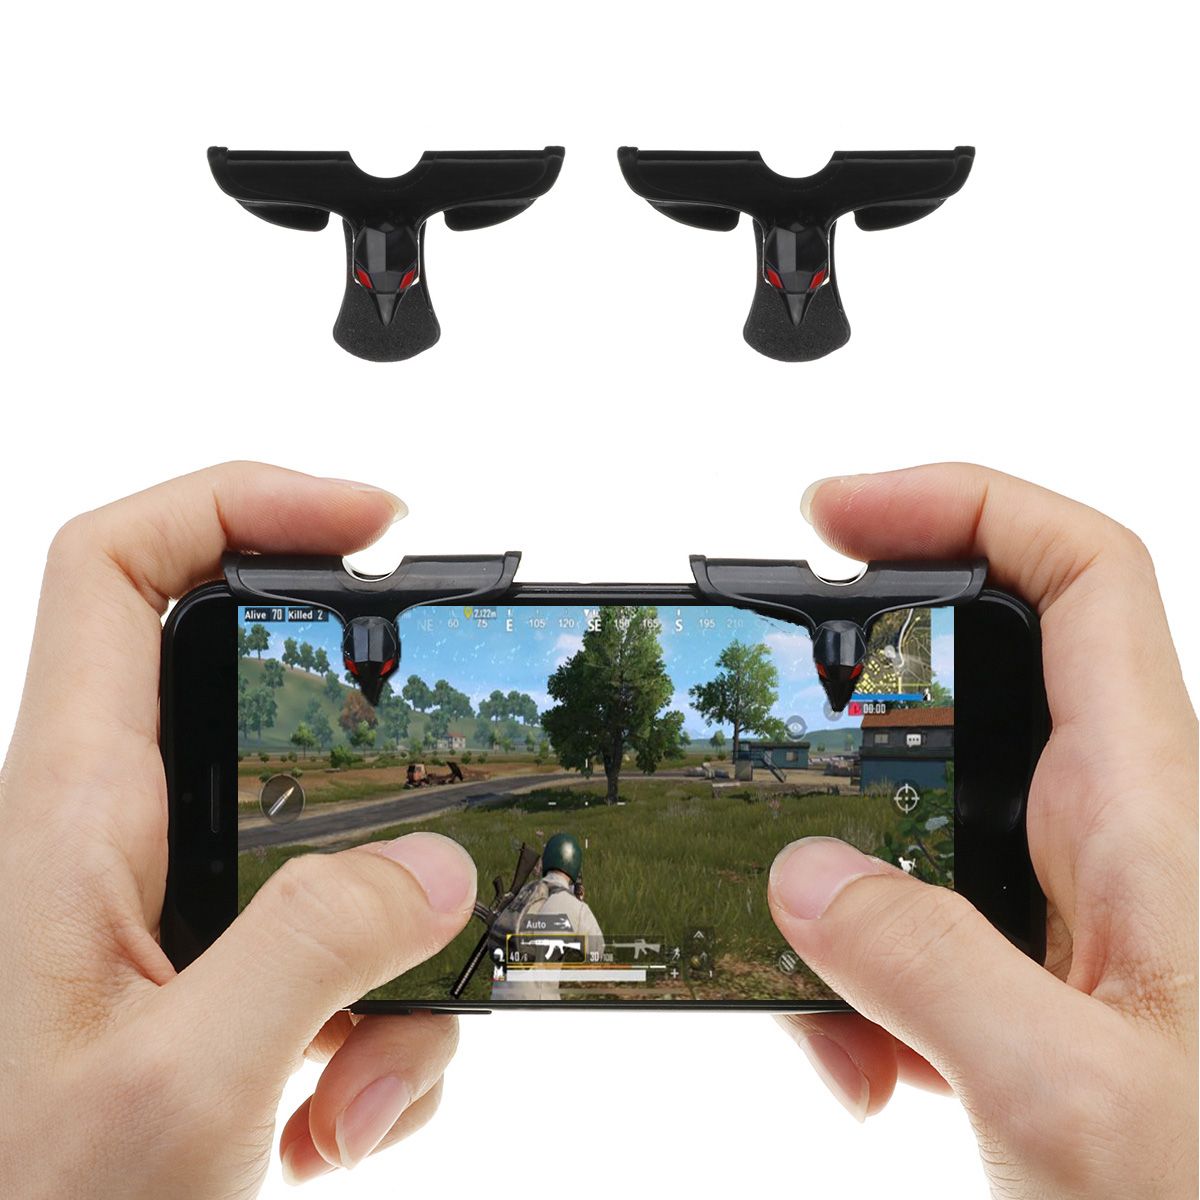 Bakeey-Gaming-Trigger-Shooter-Controller-Touch-Screen-Mobile-Gamepad-Joystick-for-Smartphoens-1330540